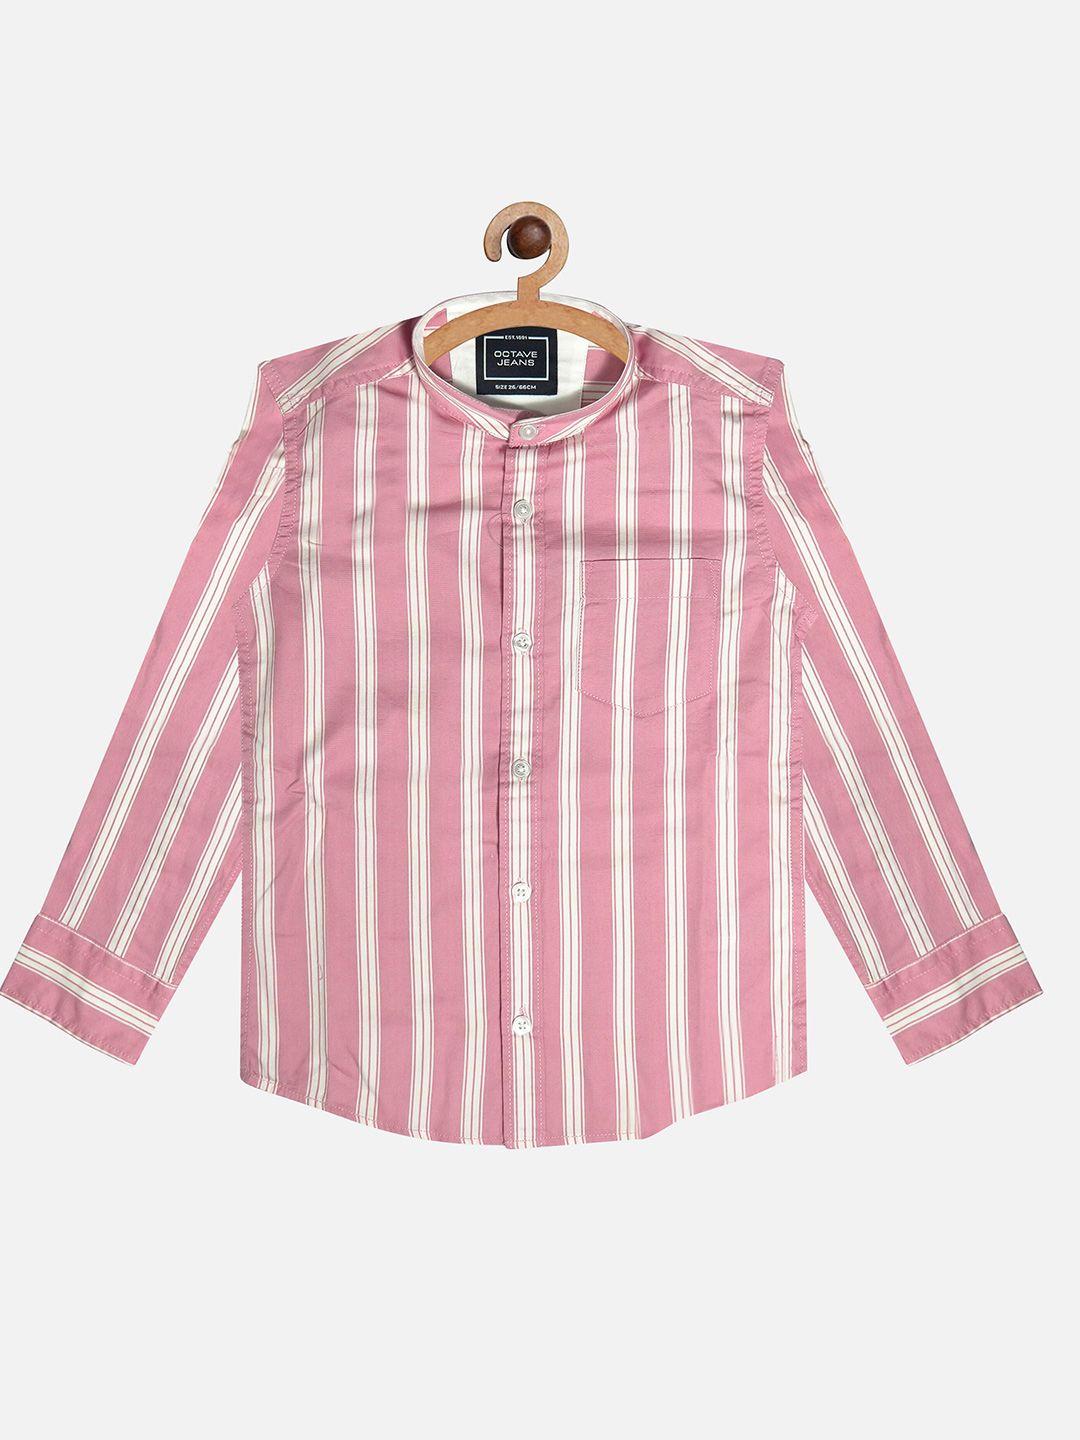 octave boys pink & white striped regular fit cotton casual shirt